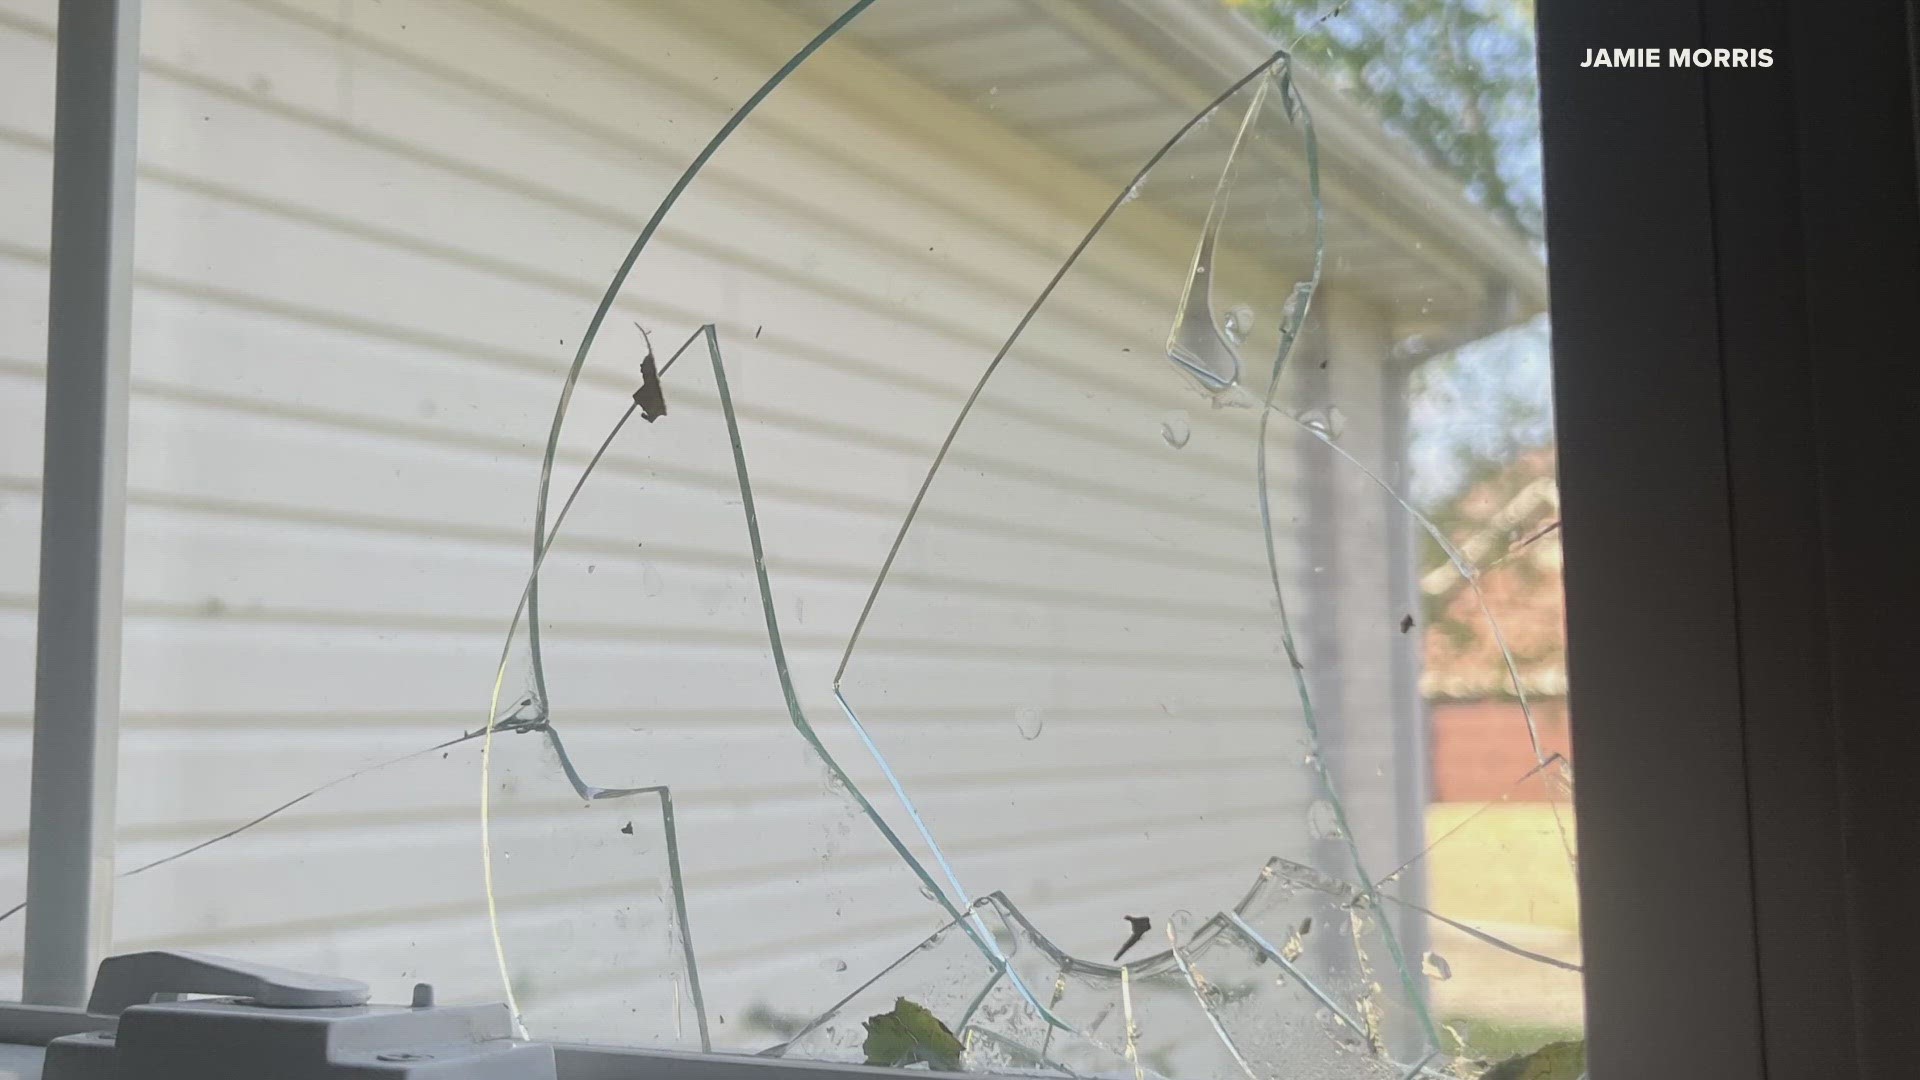 State Farm reports a large majority of these claims are related to hail, with a handful reporting damage from wind. Here are tips to avoid storm-chasing scammers.